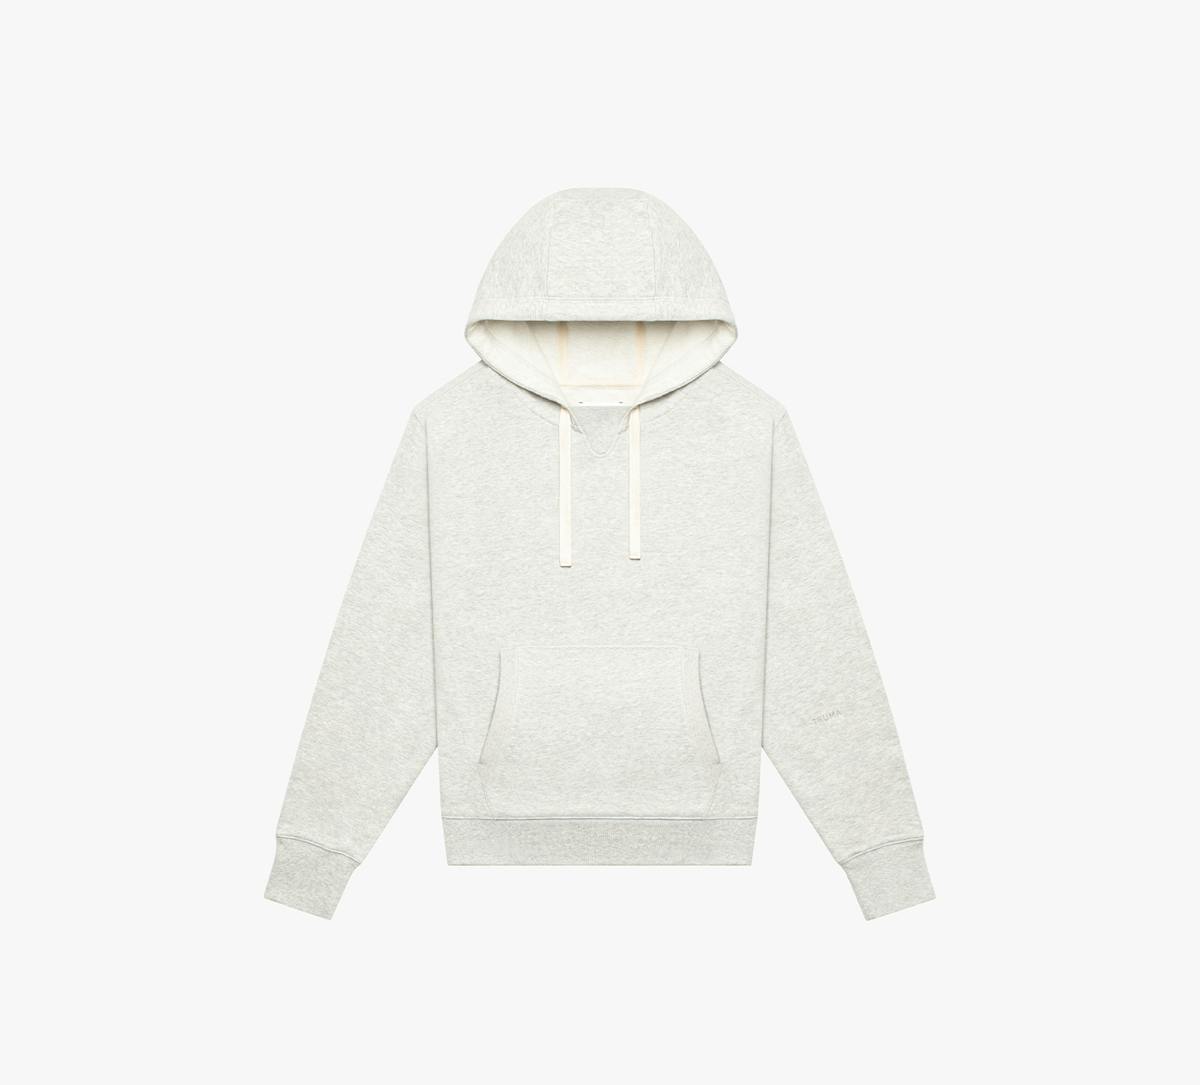 Lounge & Leisure Hoodie (Women's Fit / Oatmeal) - Front 